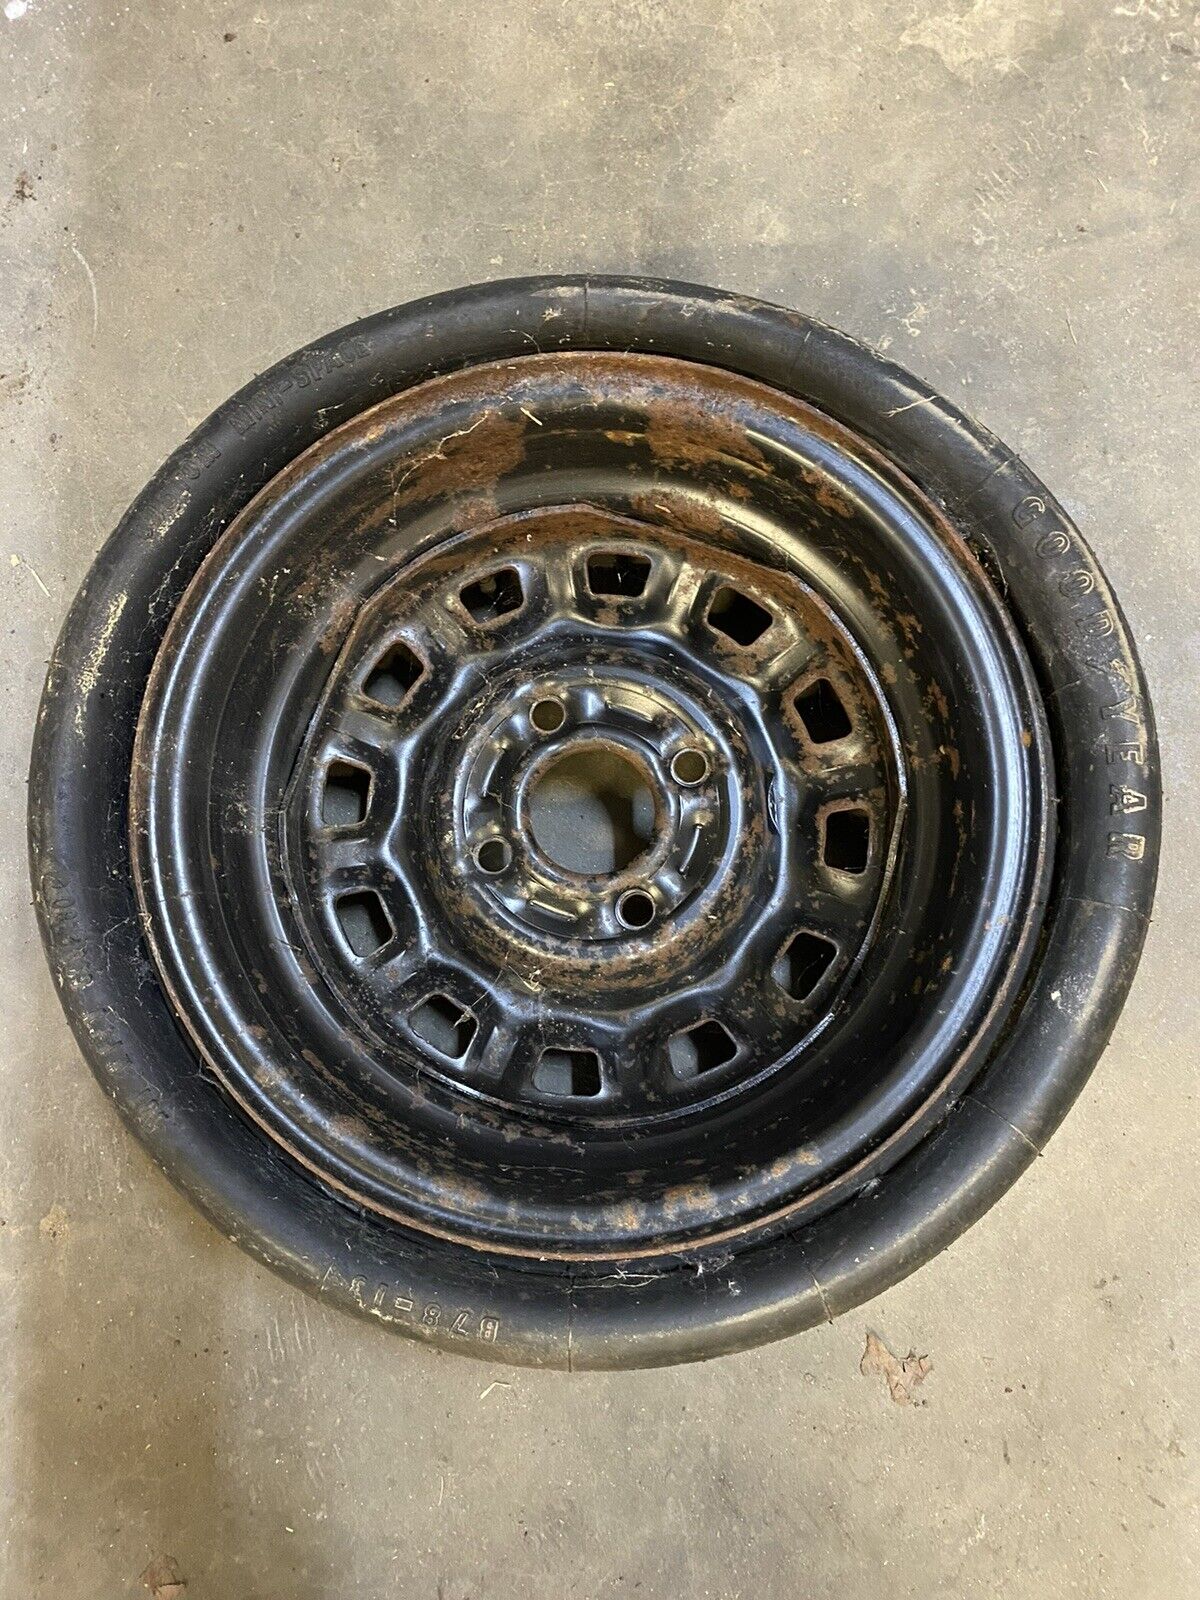 1971-80 Chevy Vega Monza Spare Tire Temporary Wheel B78-13 Never Used